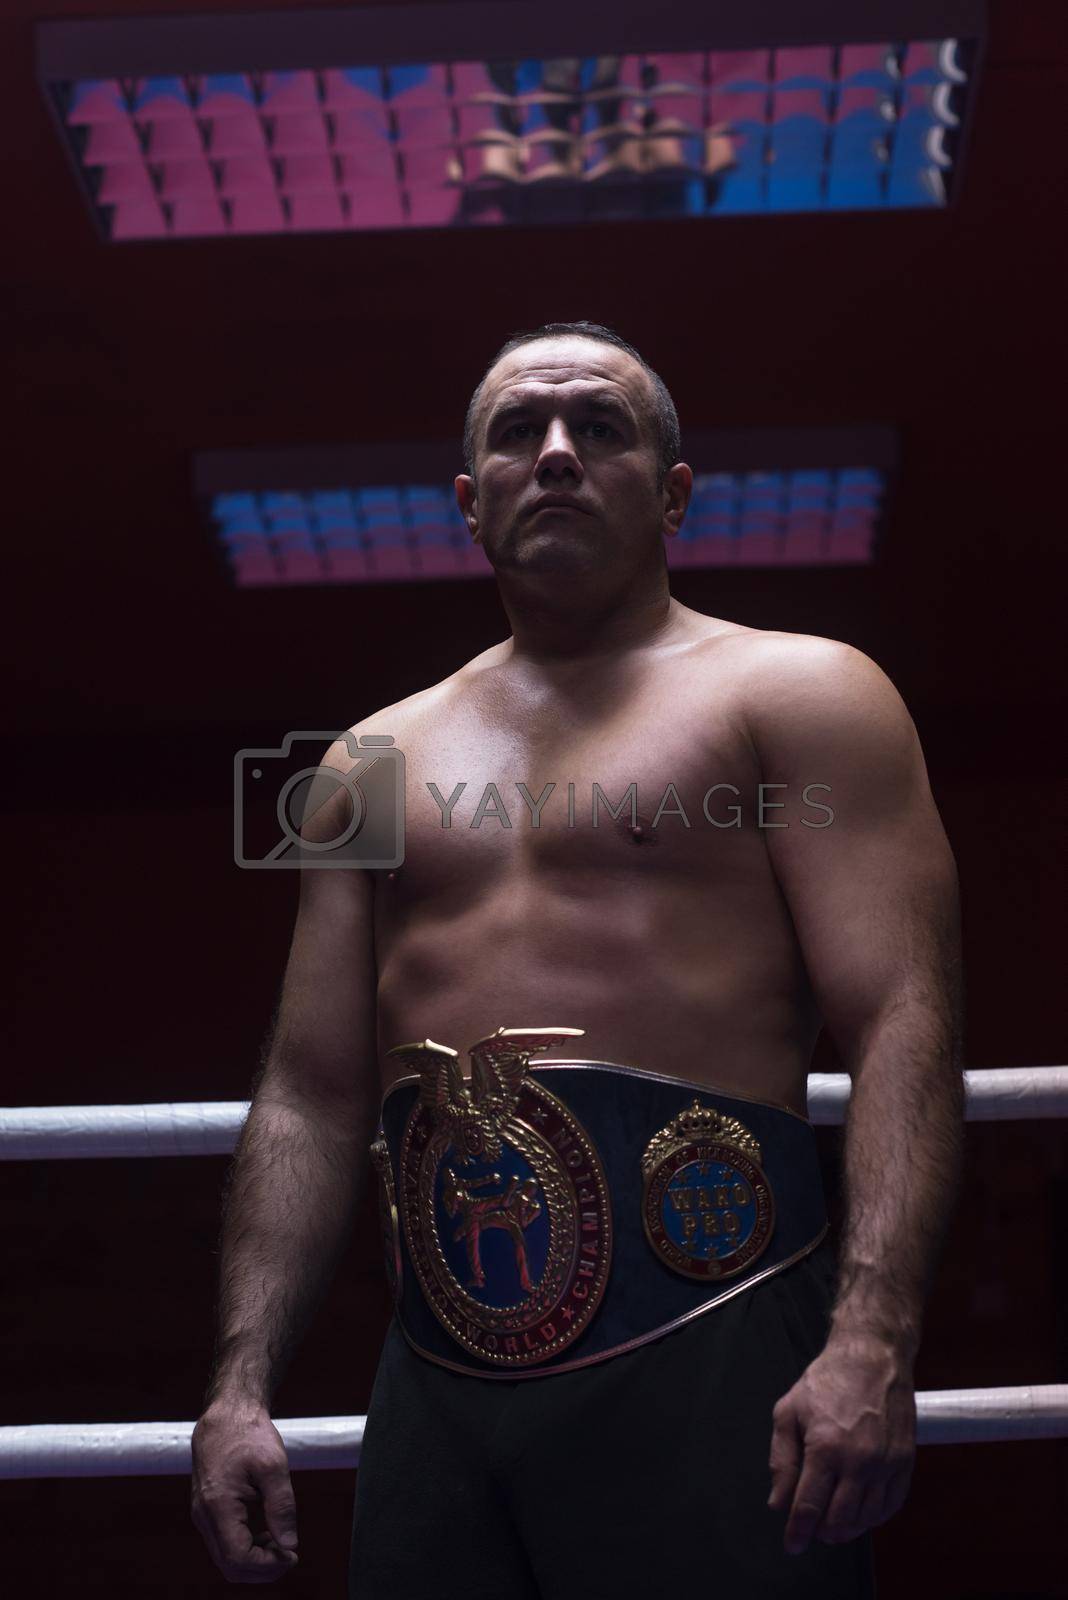 Royalty free image of kick boxer with his championship belt by dotshock